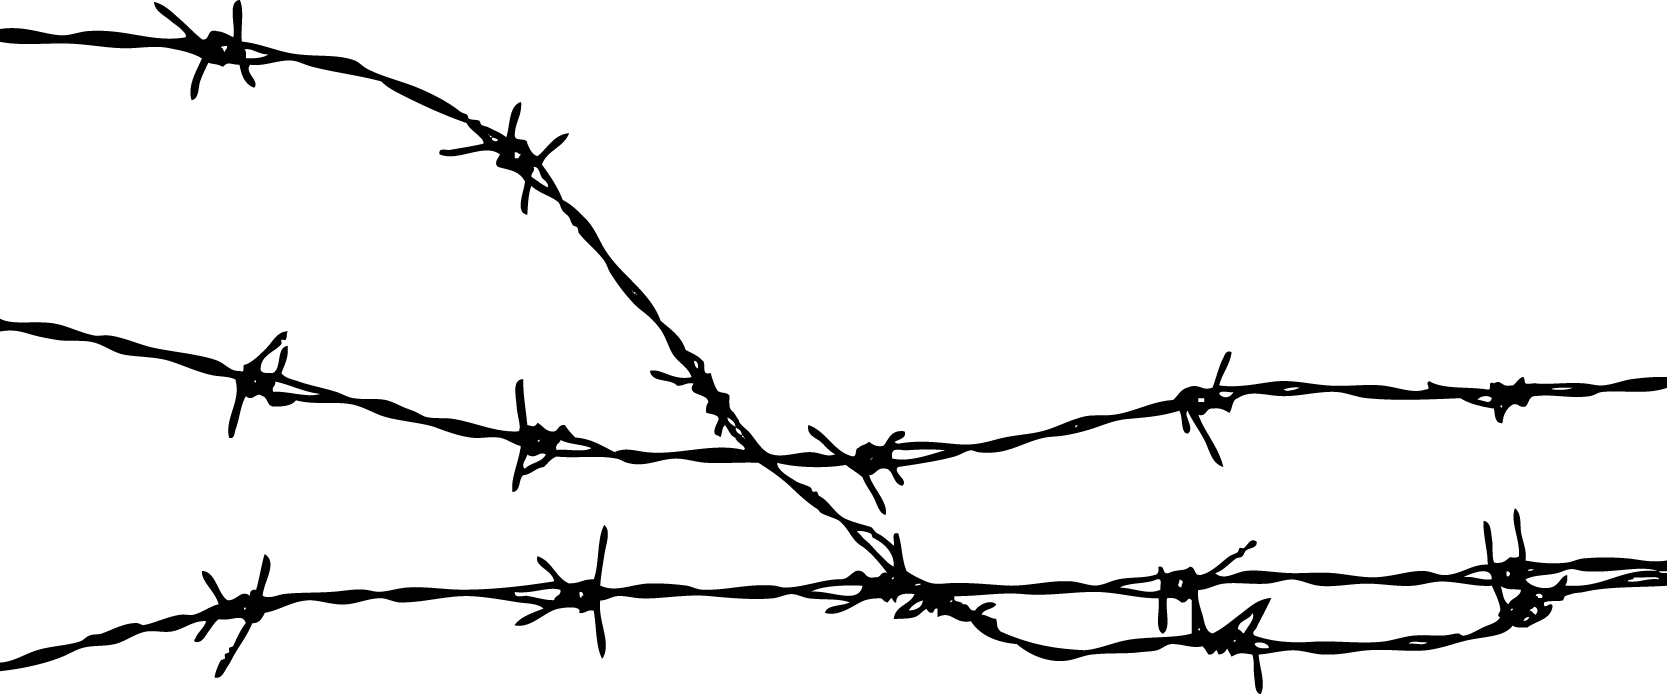 Barbed Wire Borders - ClipArt Best